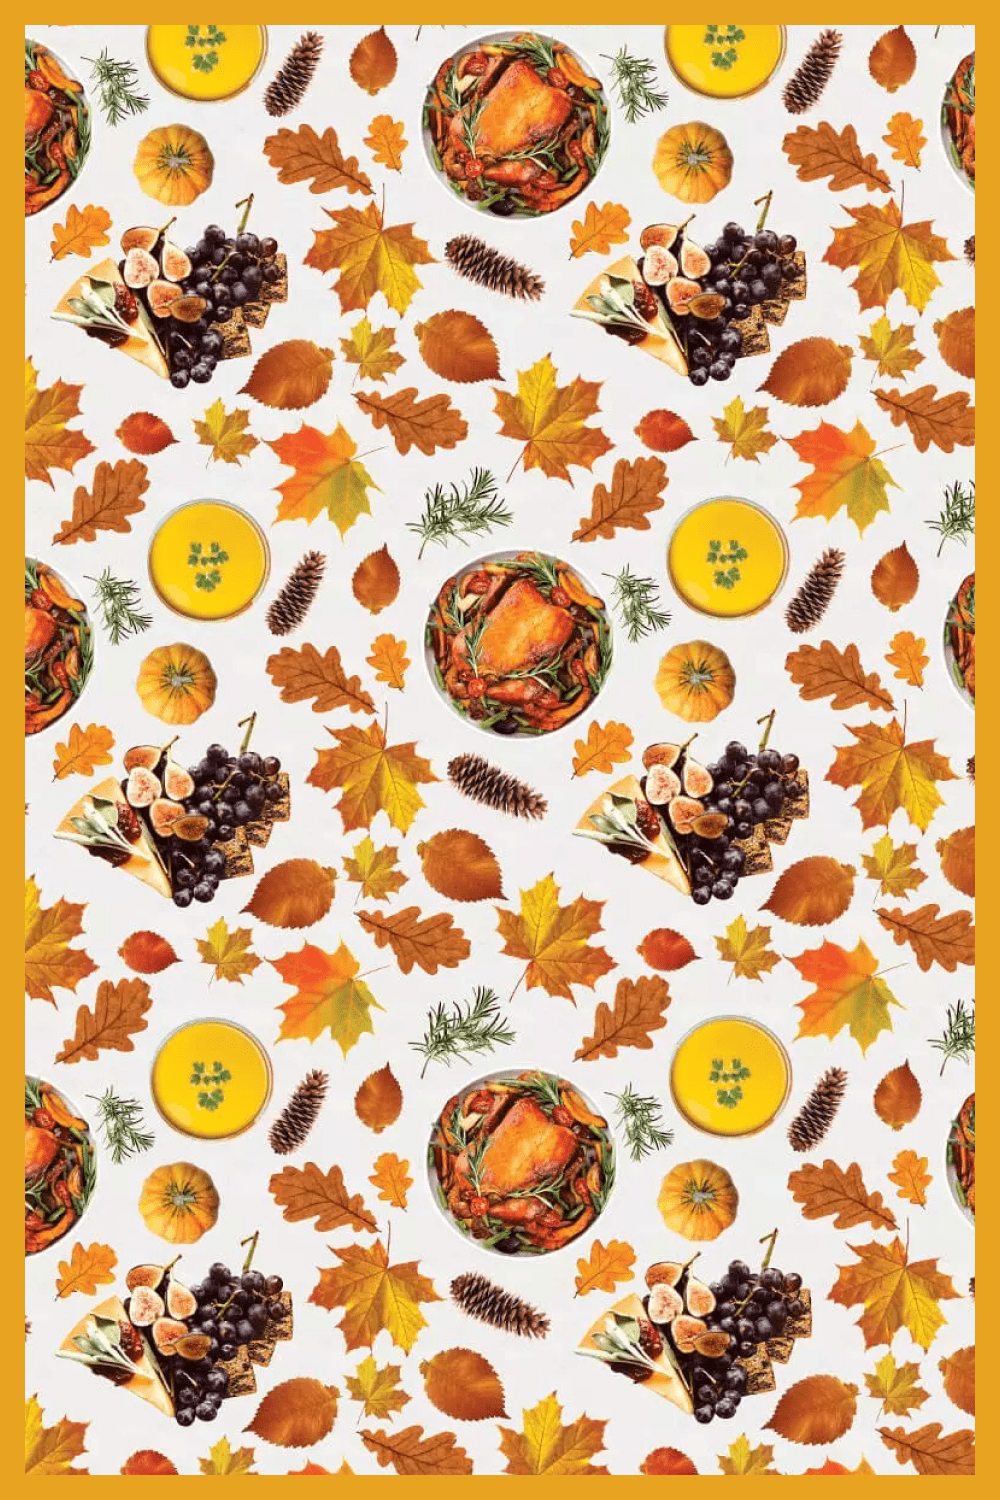 Cones, autumn leaves, pumpkins, grapes on a white background.